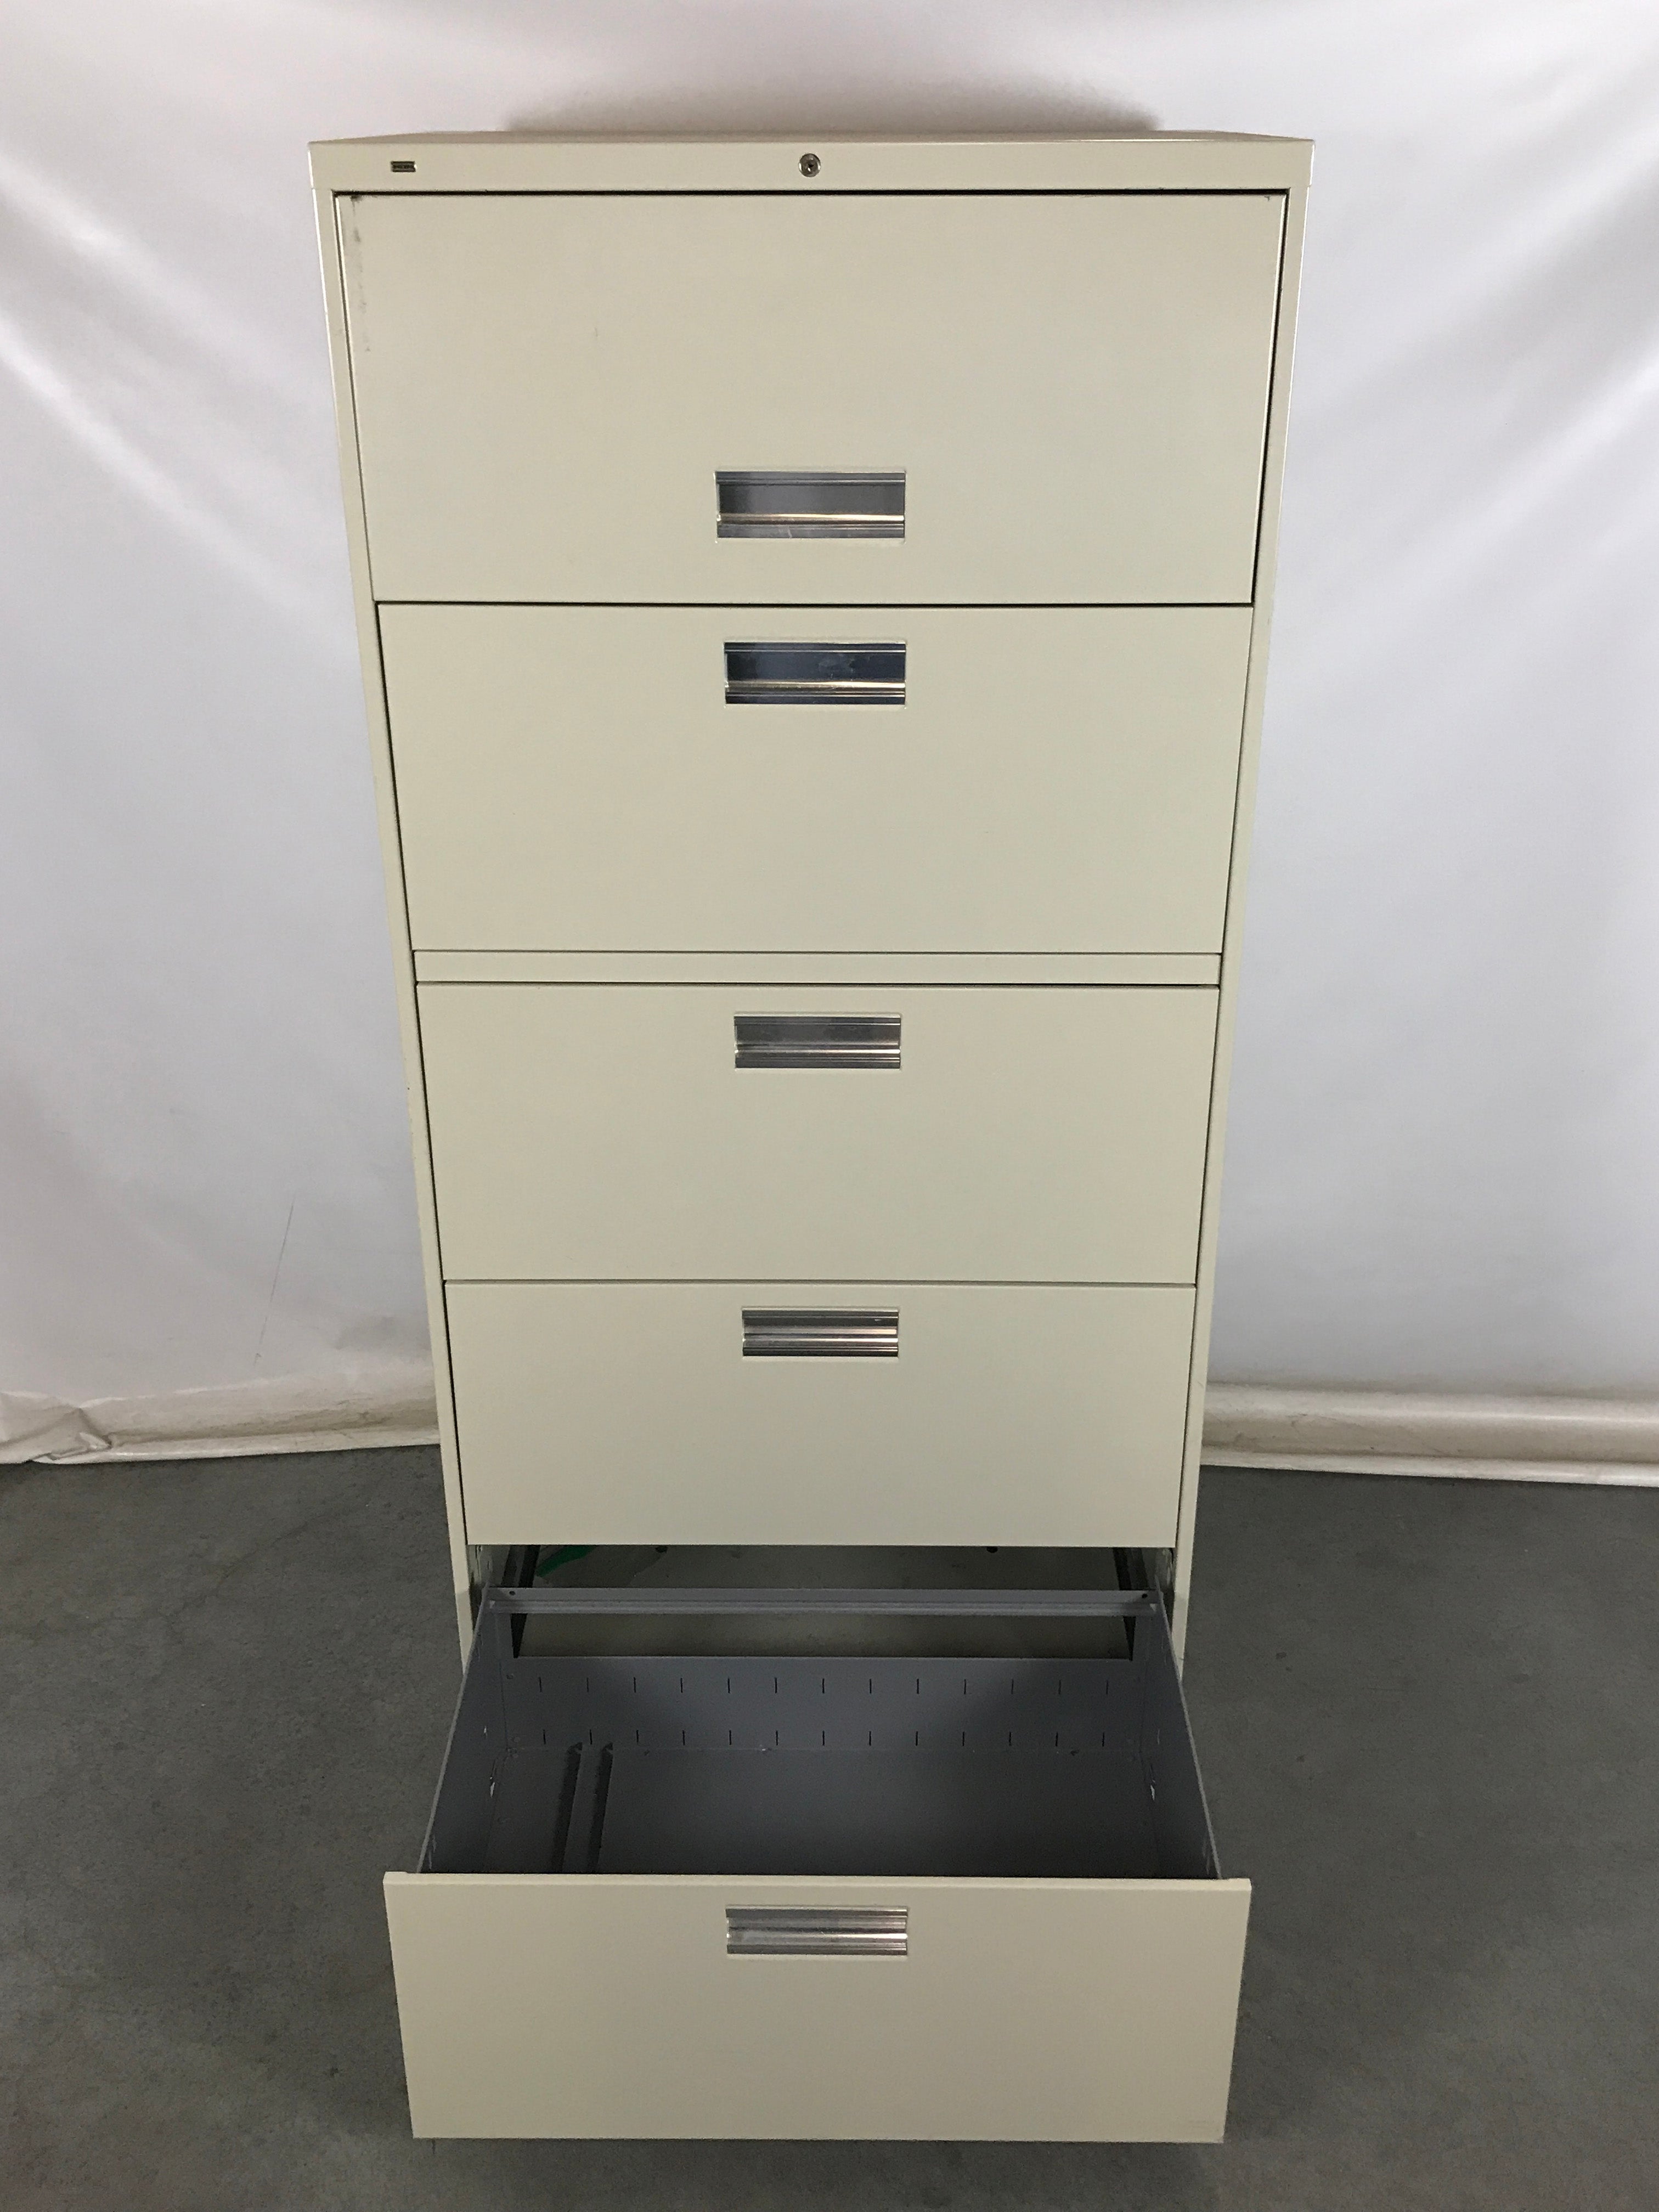 HON Beige 5 Drawer Lateral File Cabinet